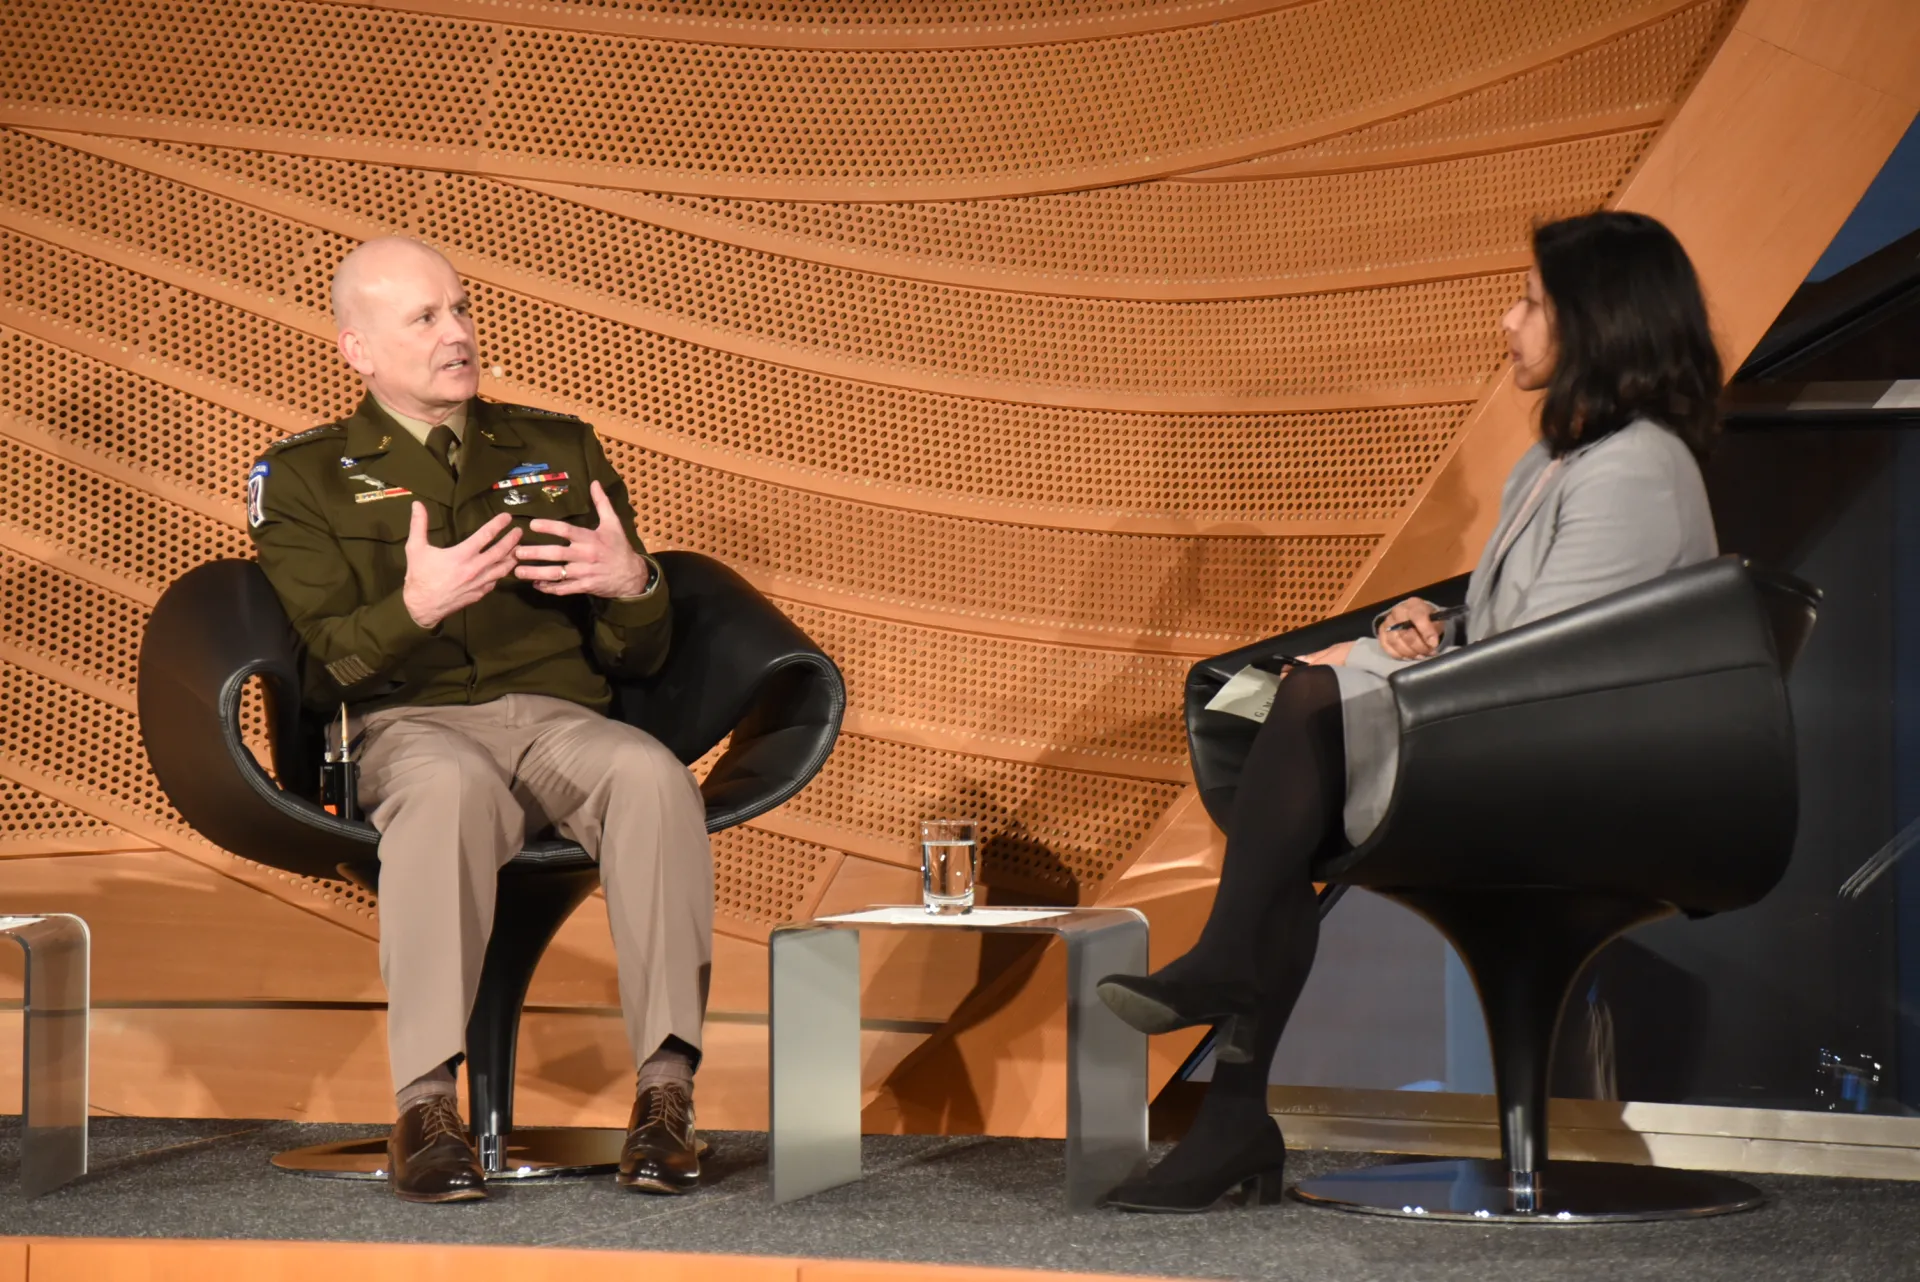 General Christopher G. Cavoli and Sudha David-Wilp discussing at anniversary conference in Berlin, March 2023